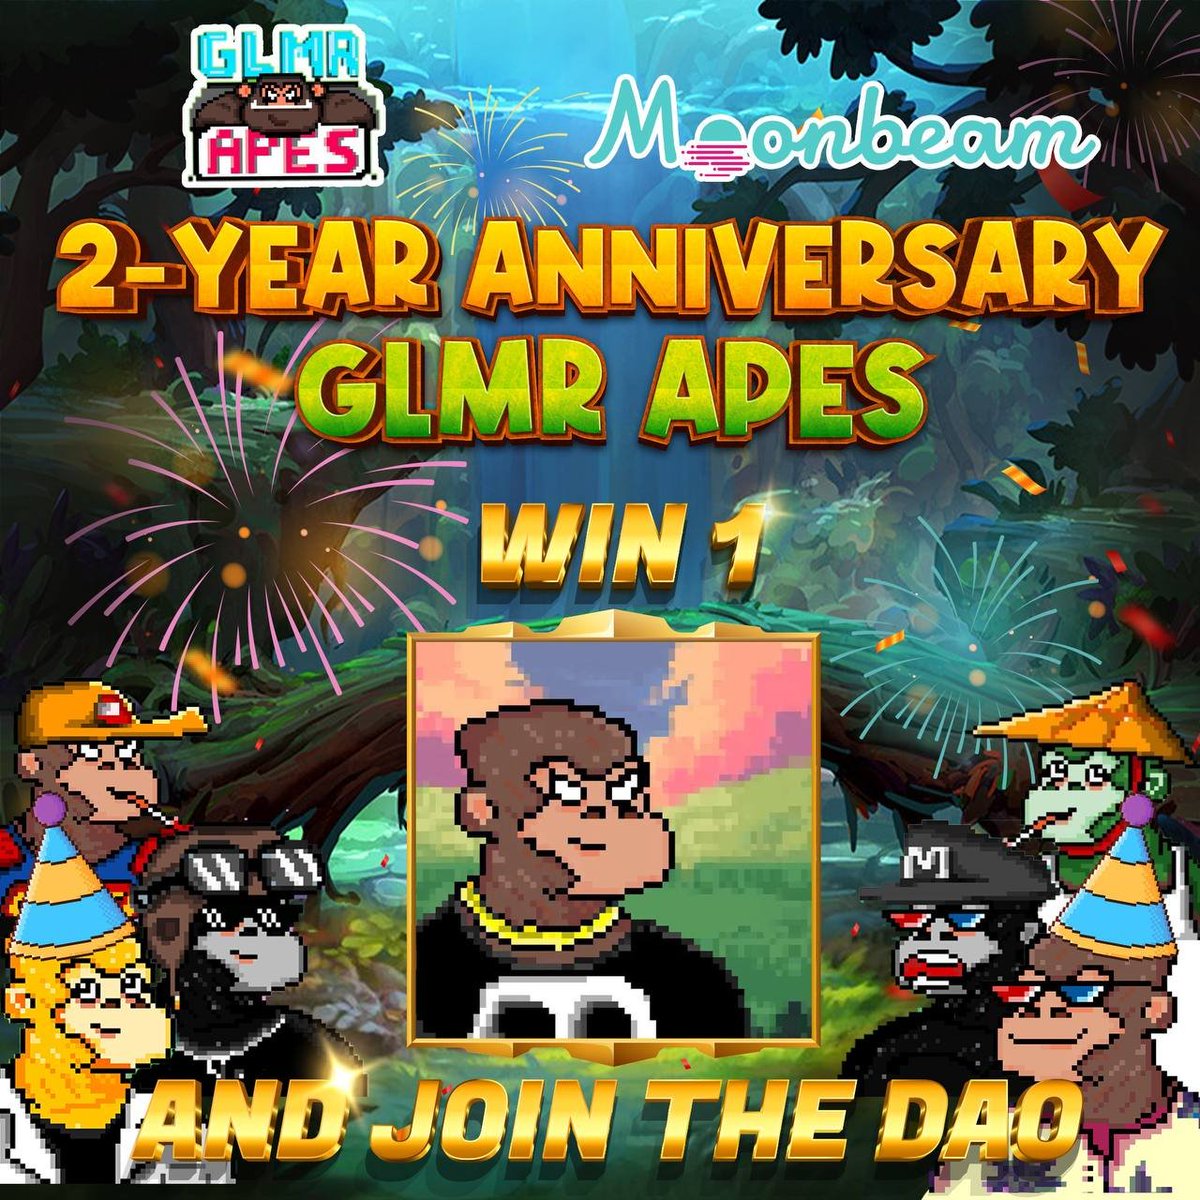 We are turning 2 years old! 🥳 🎊 To celebrate our birthday, we're giving away a GLMR APE (~200$). 🎁 Win your NFT to join the DAO and take part in the Great Escape game's governance: 1⃣ Follow us & @PlayTGE 2⃣ Like + RT 💡 Bonus: Write a comment and hope for the best...